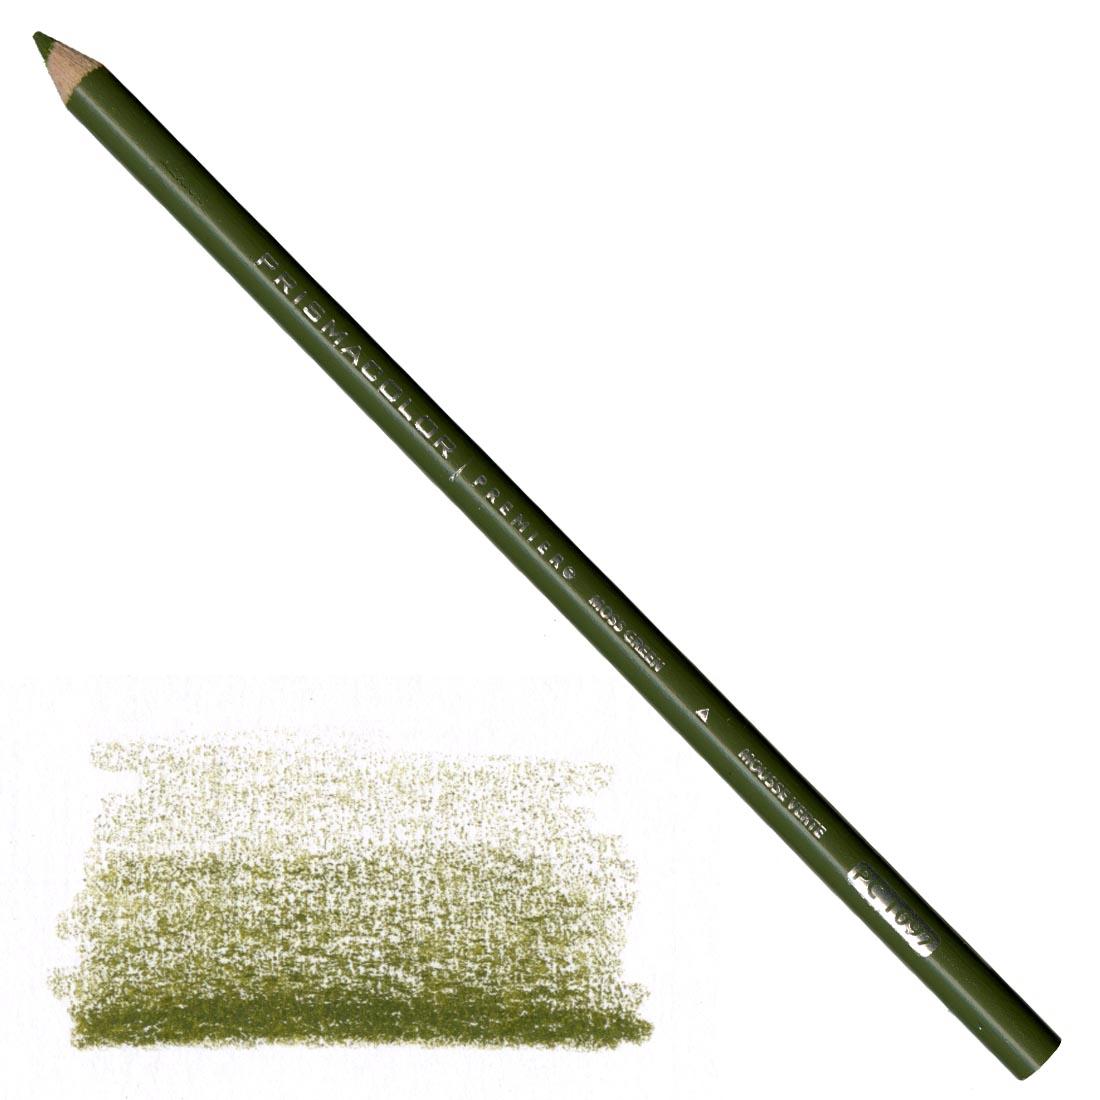 Moss Green Prismacolor Premier Colored Pencil with a sample colored swatch